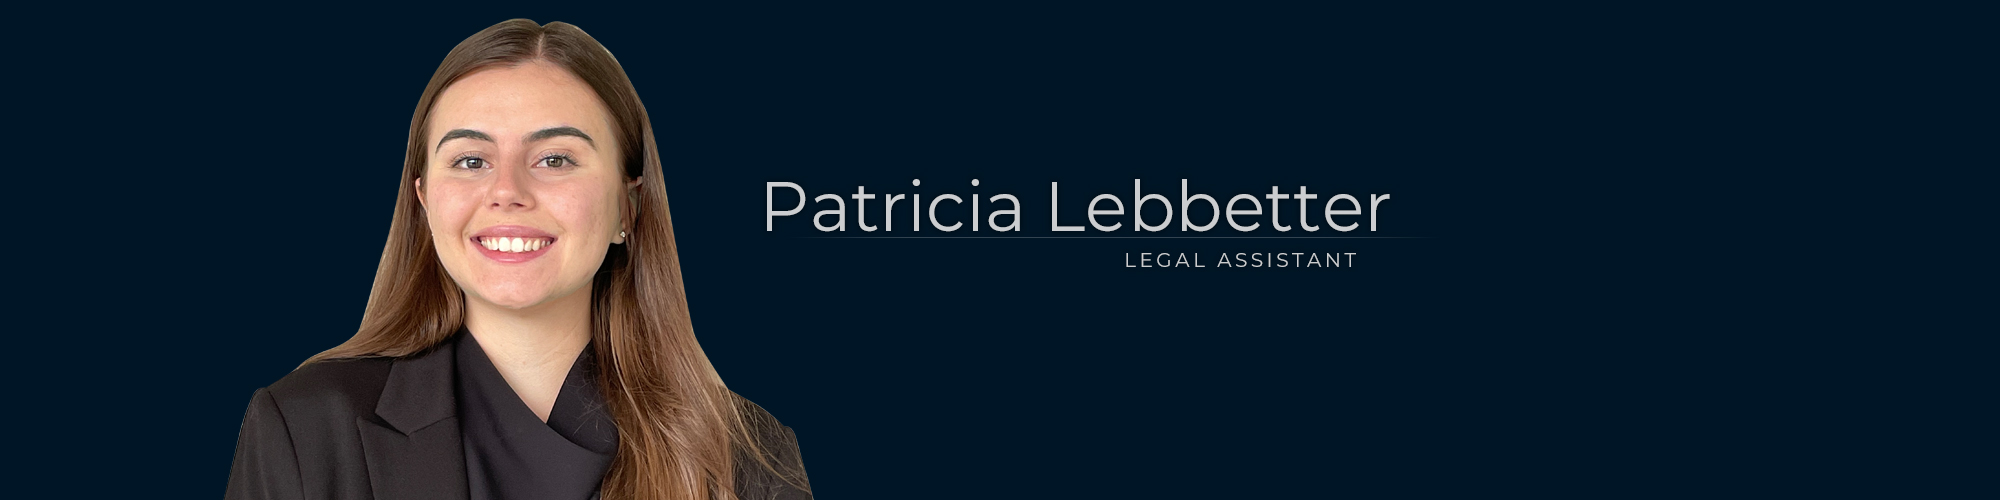 Patricia Lebbetter - Legal Assistant at Dominion GovLaw LLP